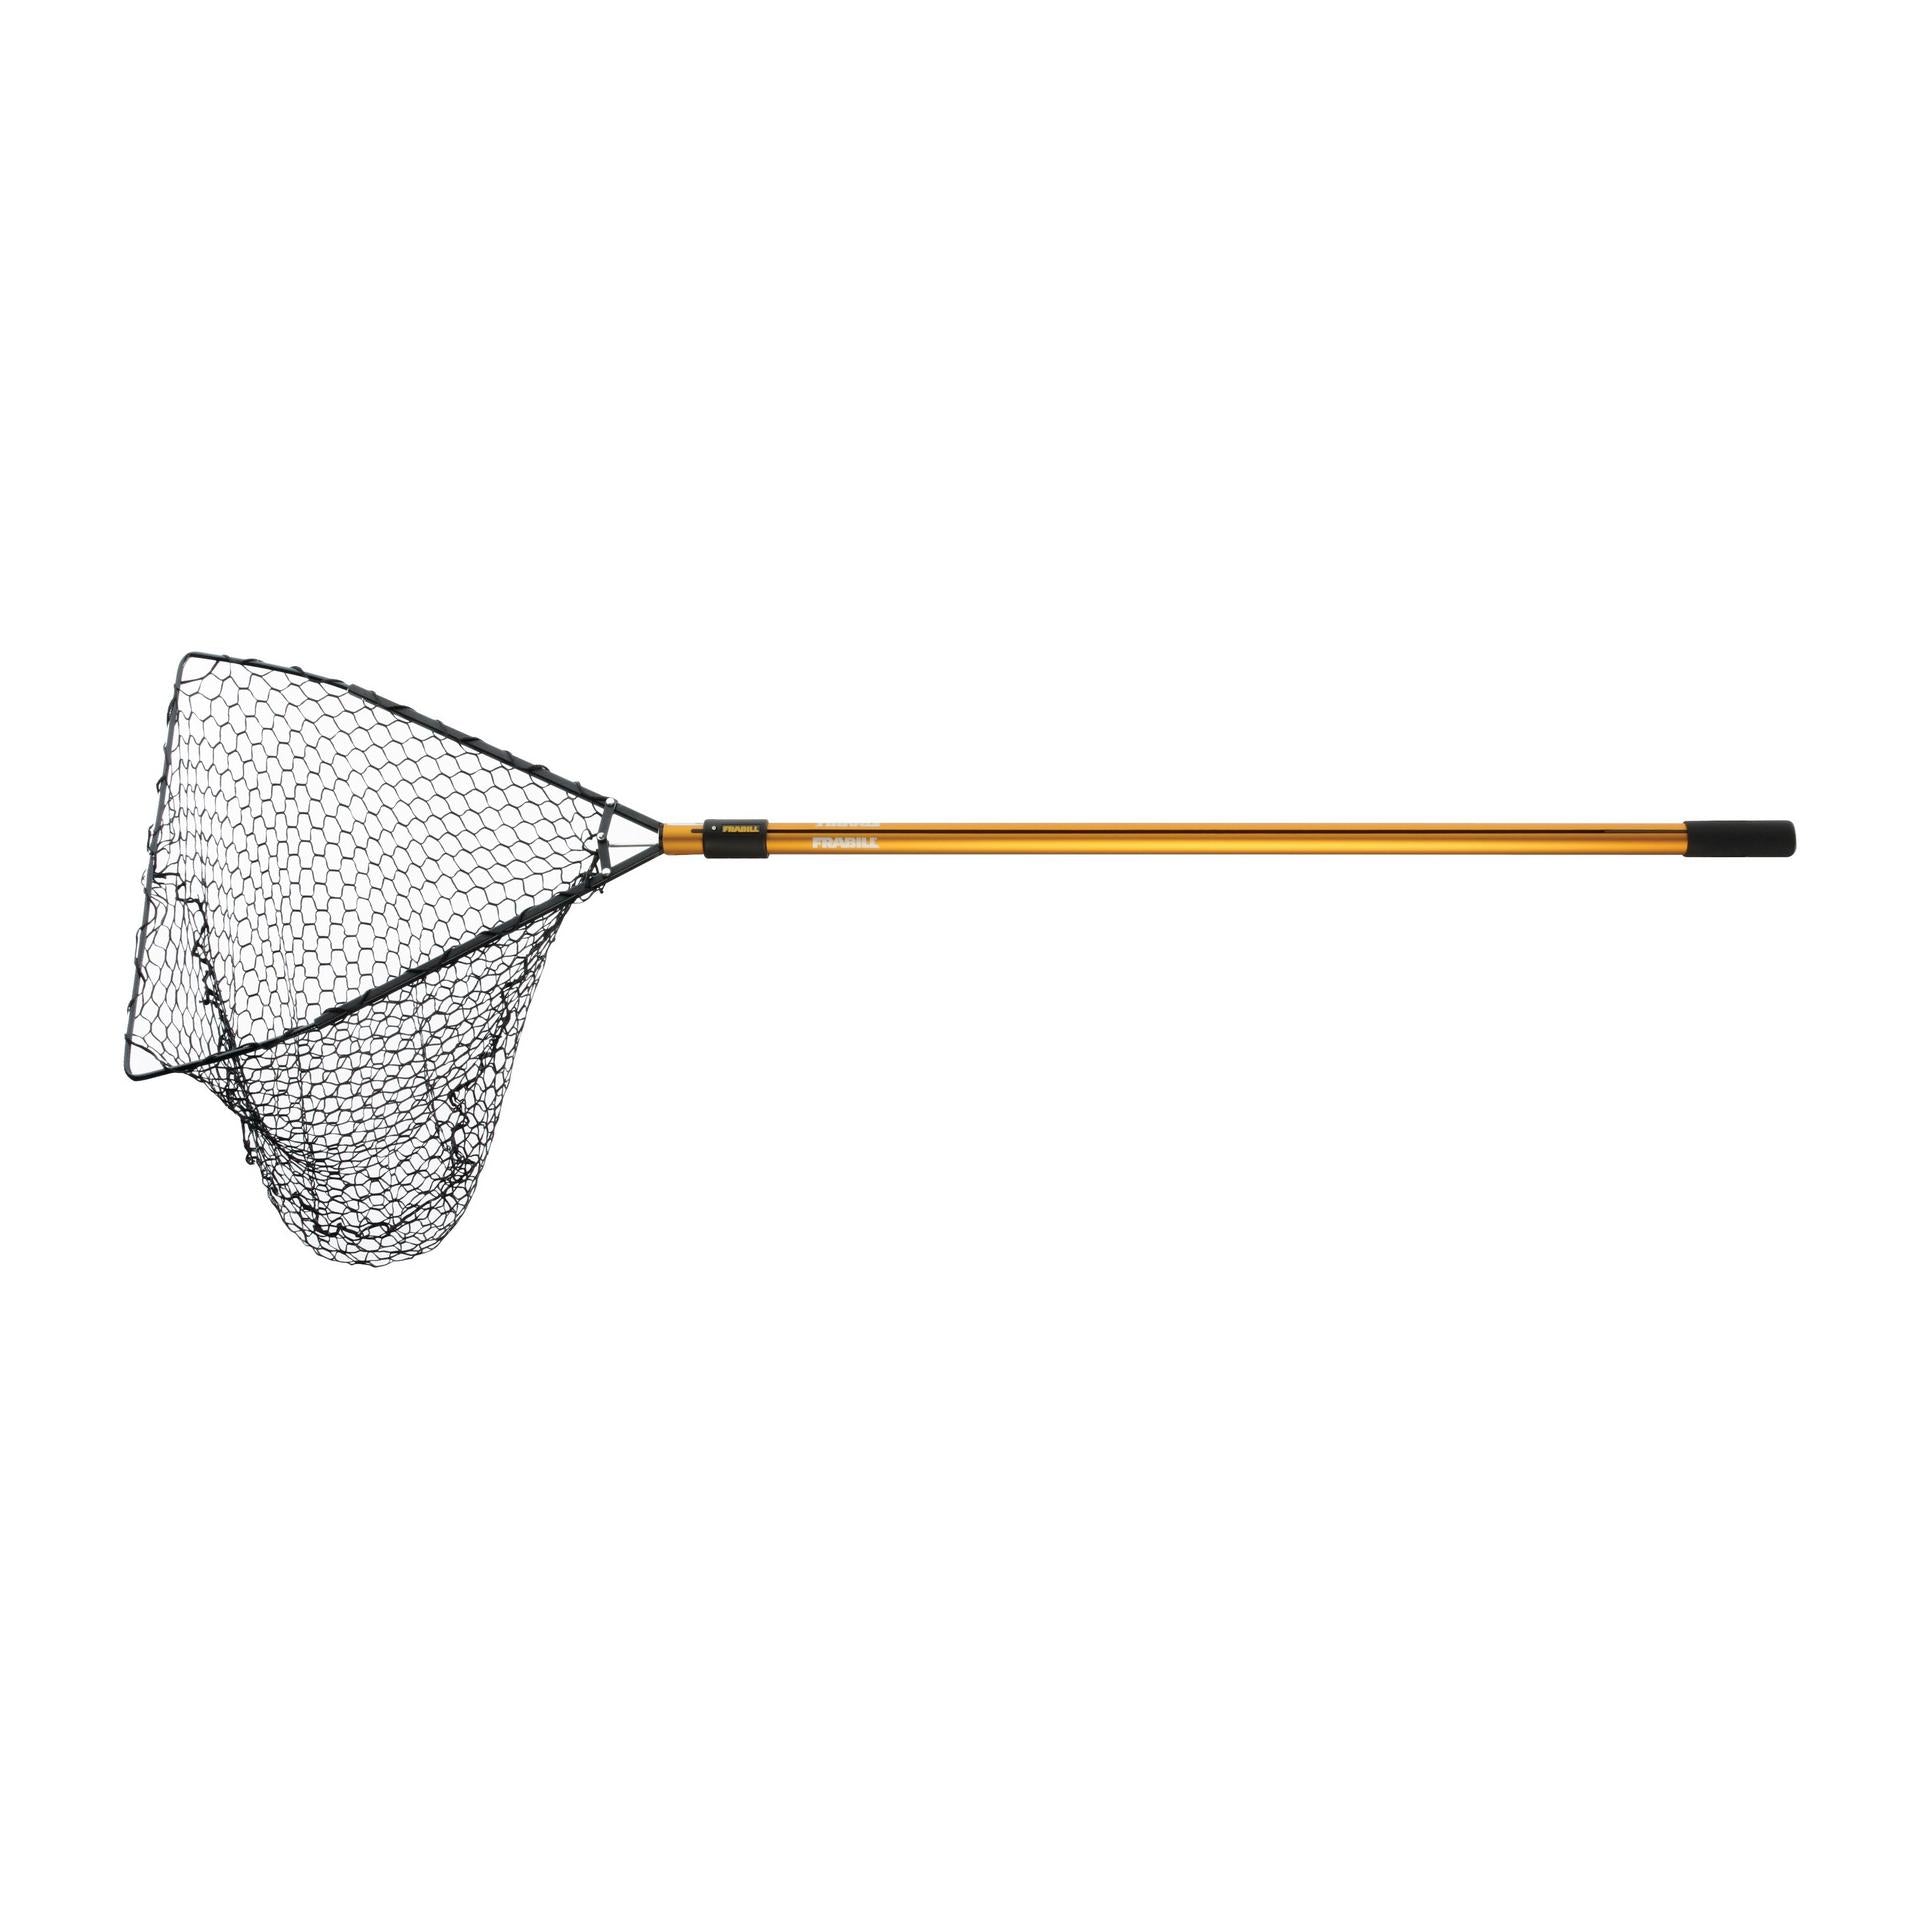 Rigged 0.35 x 100mm (4 Inch) Bass/Mullet Net : Advanced Netting